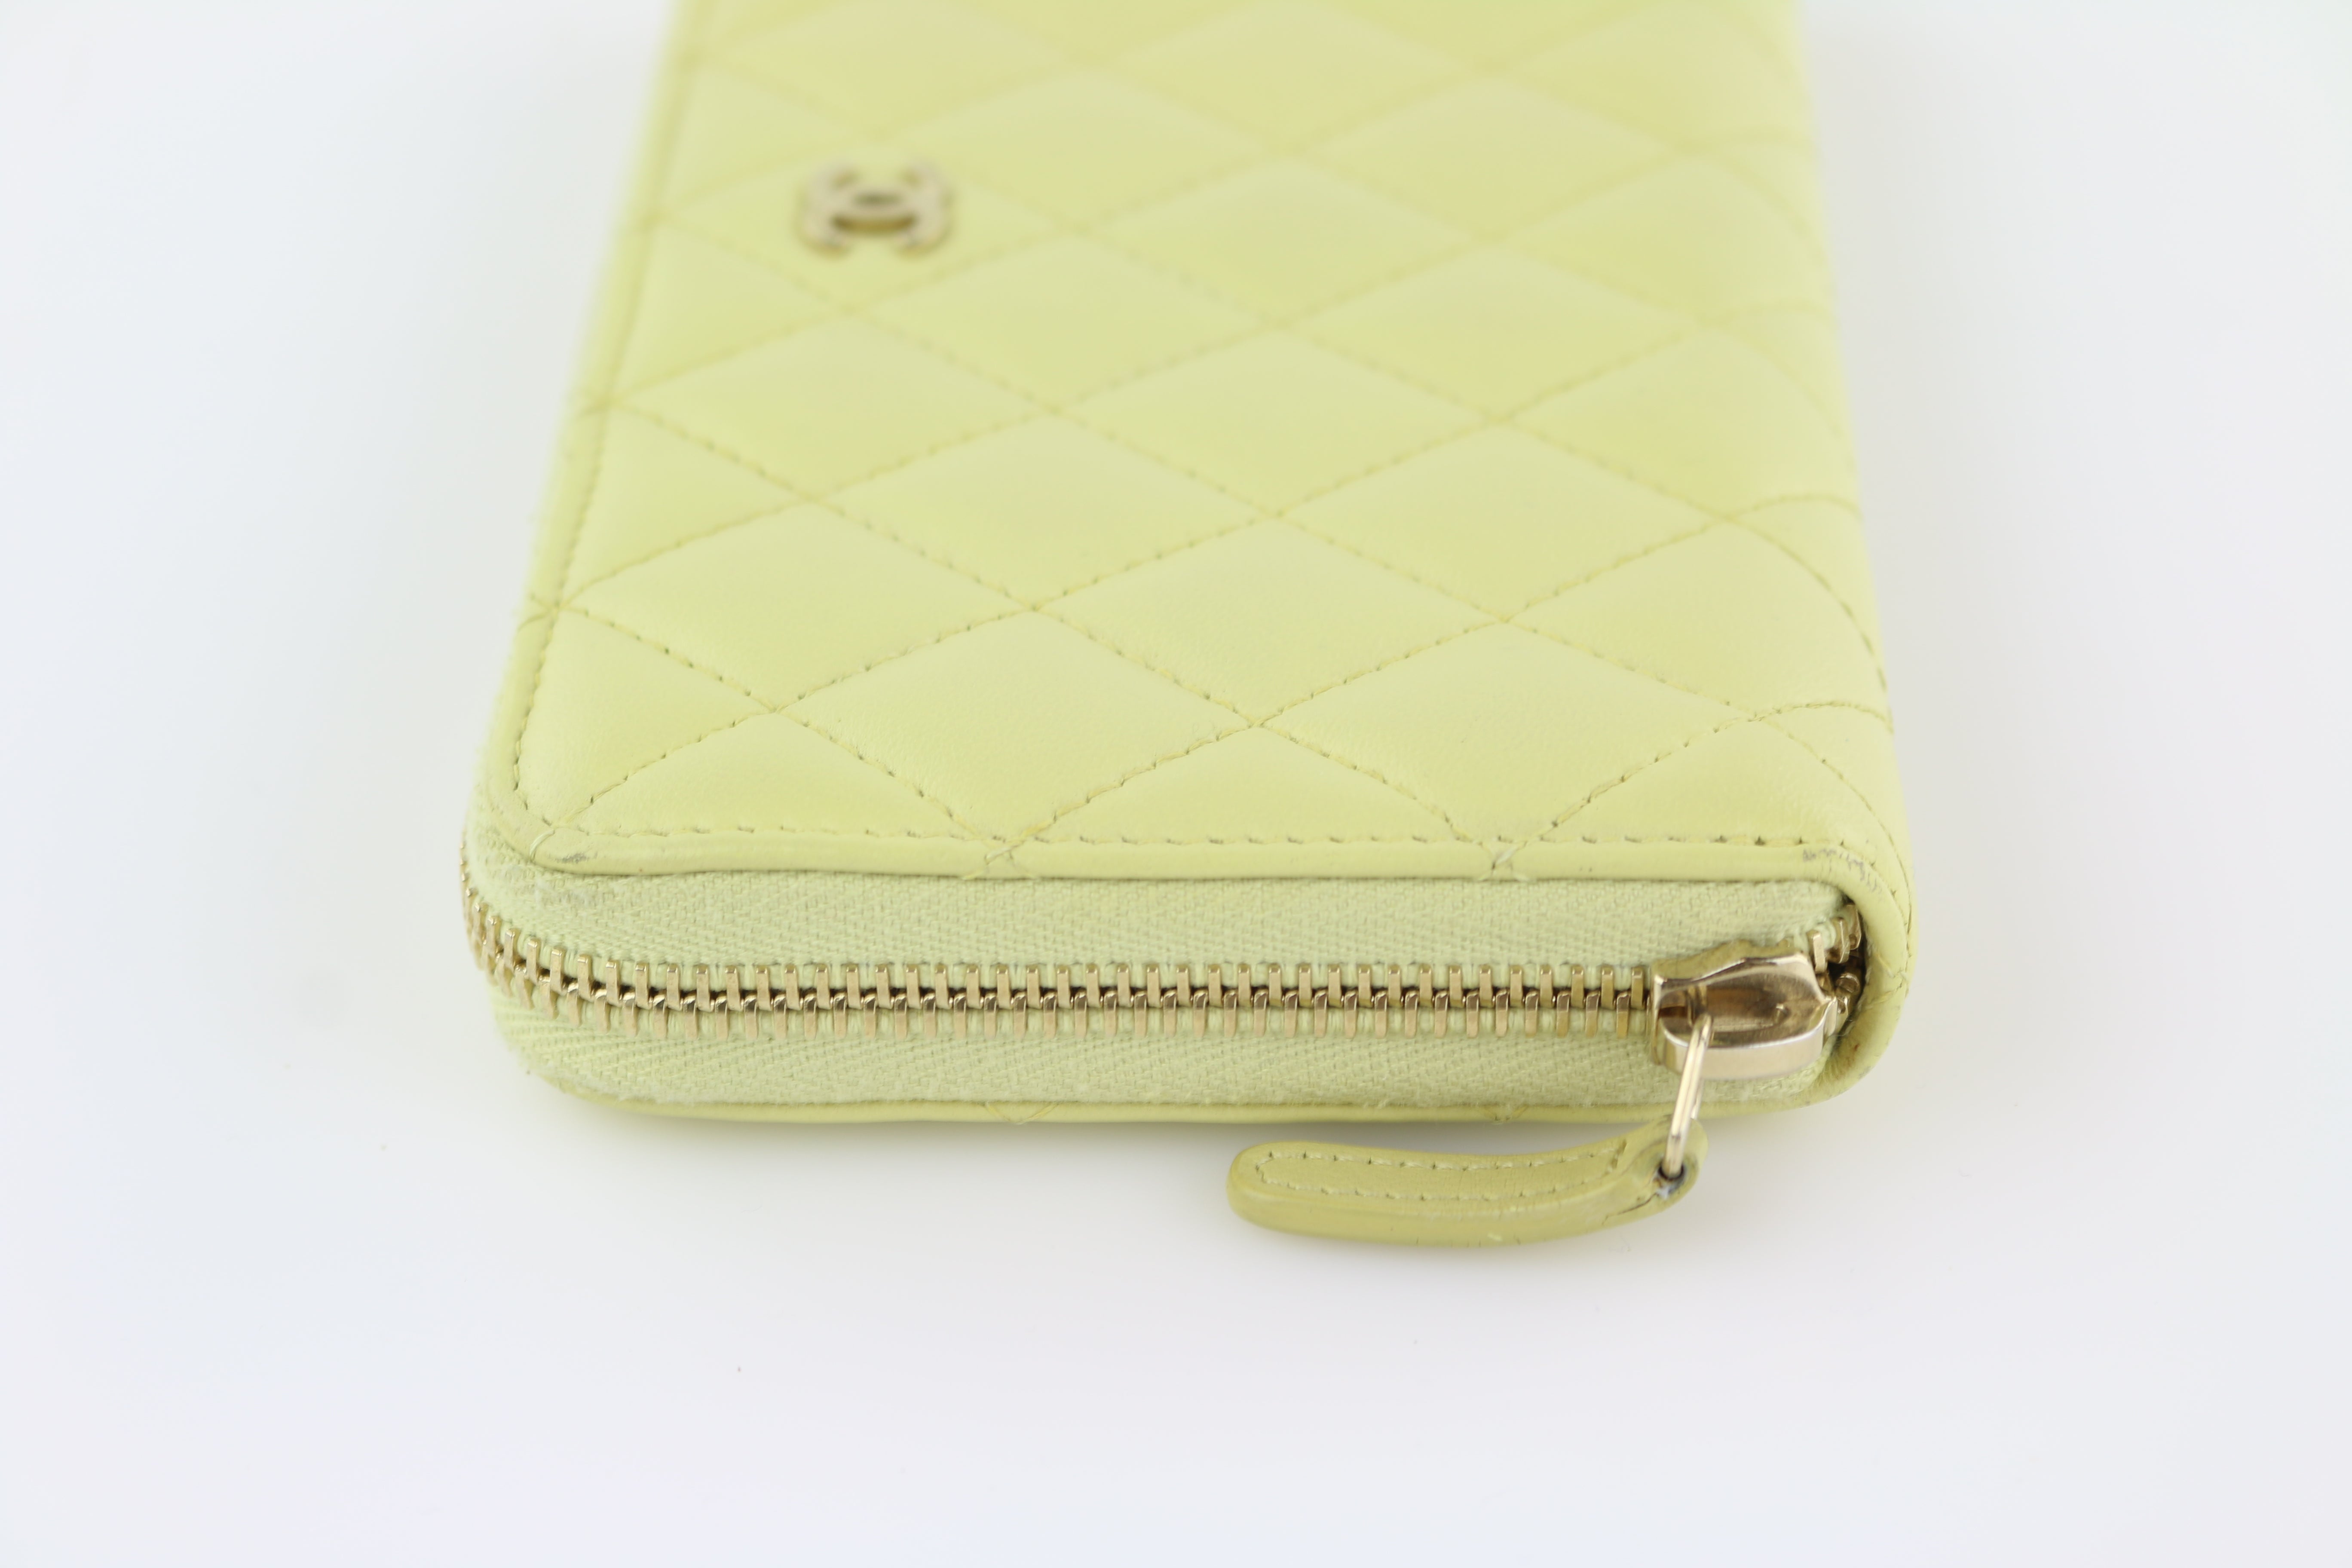 Chanel Croc Embossed Zip O Coin Purse Wallet